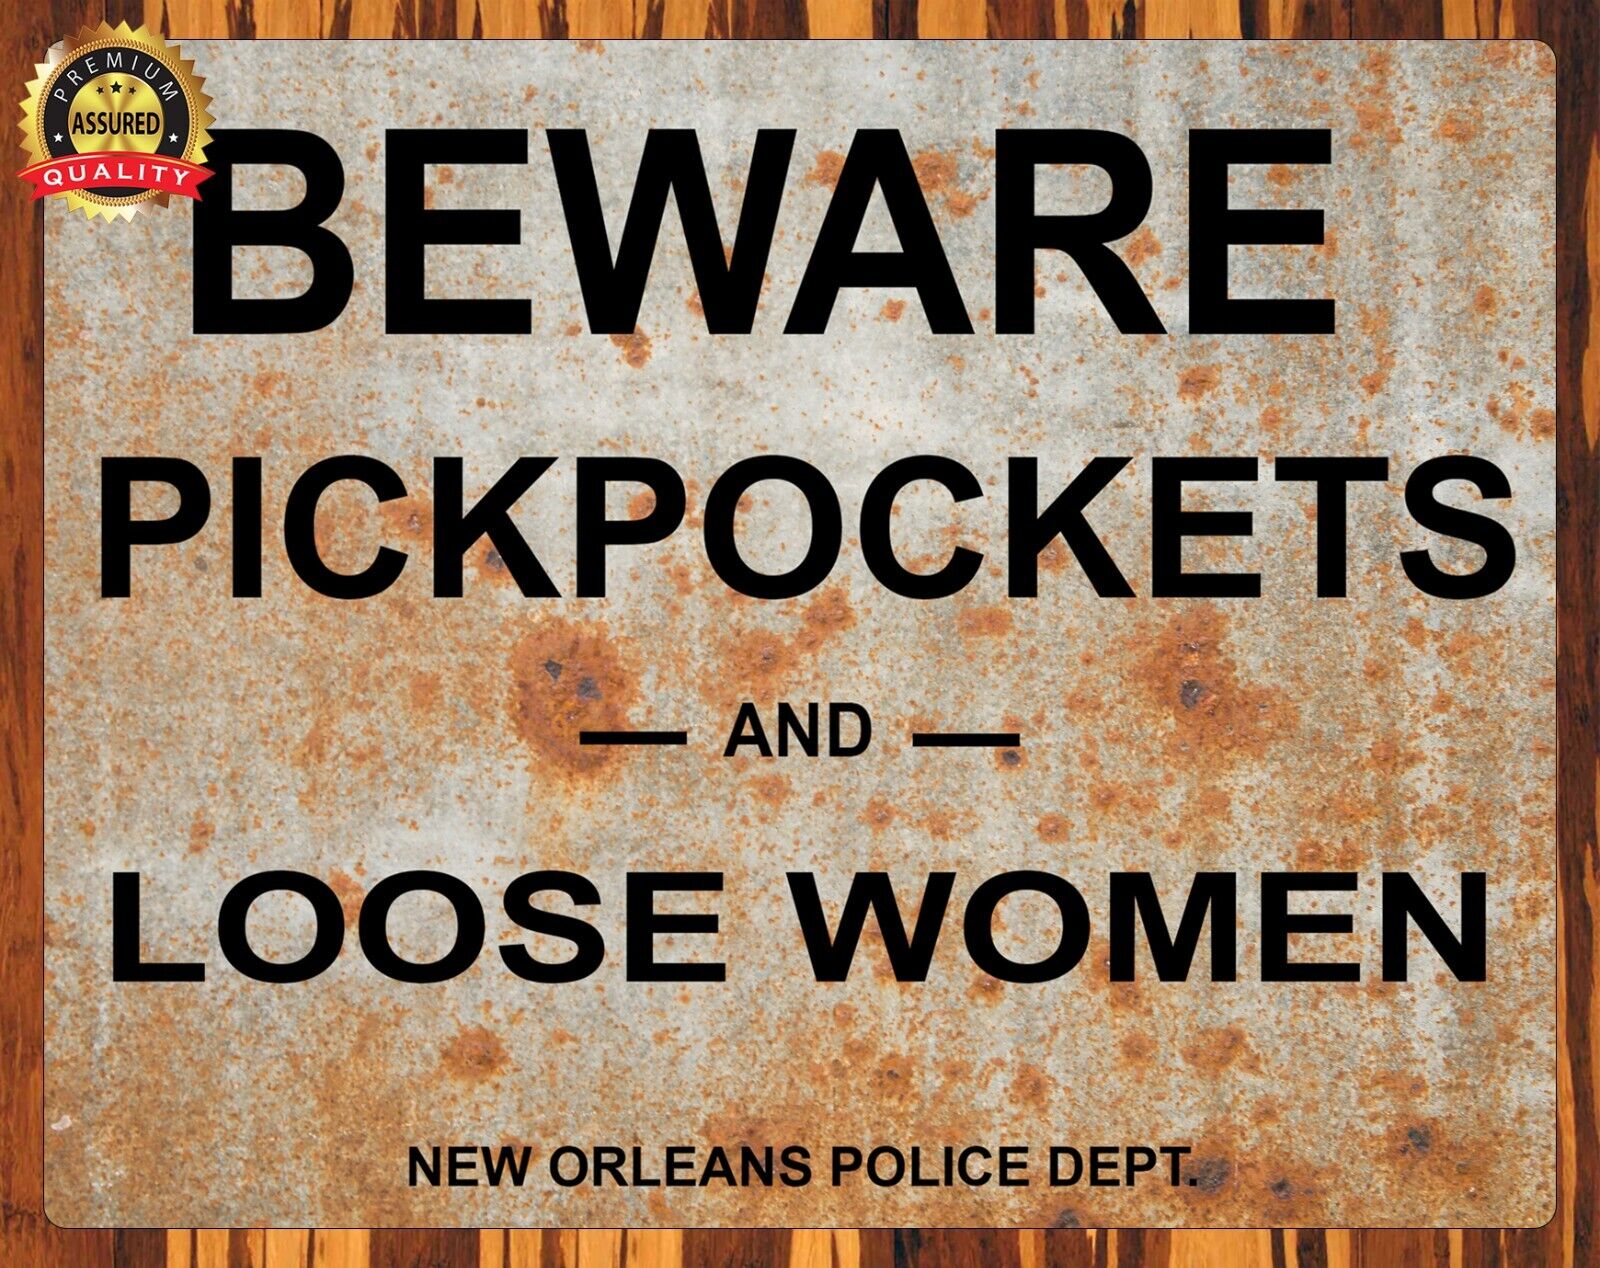 Beware Pickpockets and Loose Women - Aged Look - Humor - Metal Sign 11 x 14